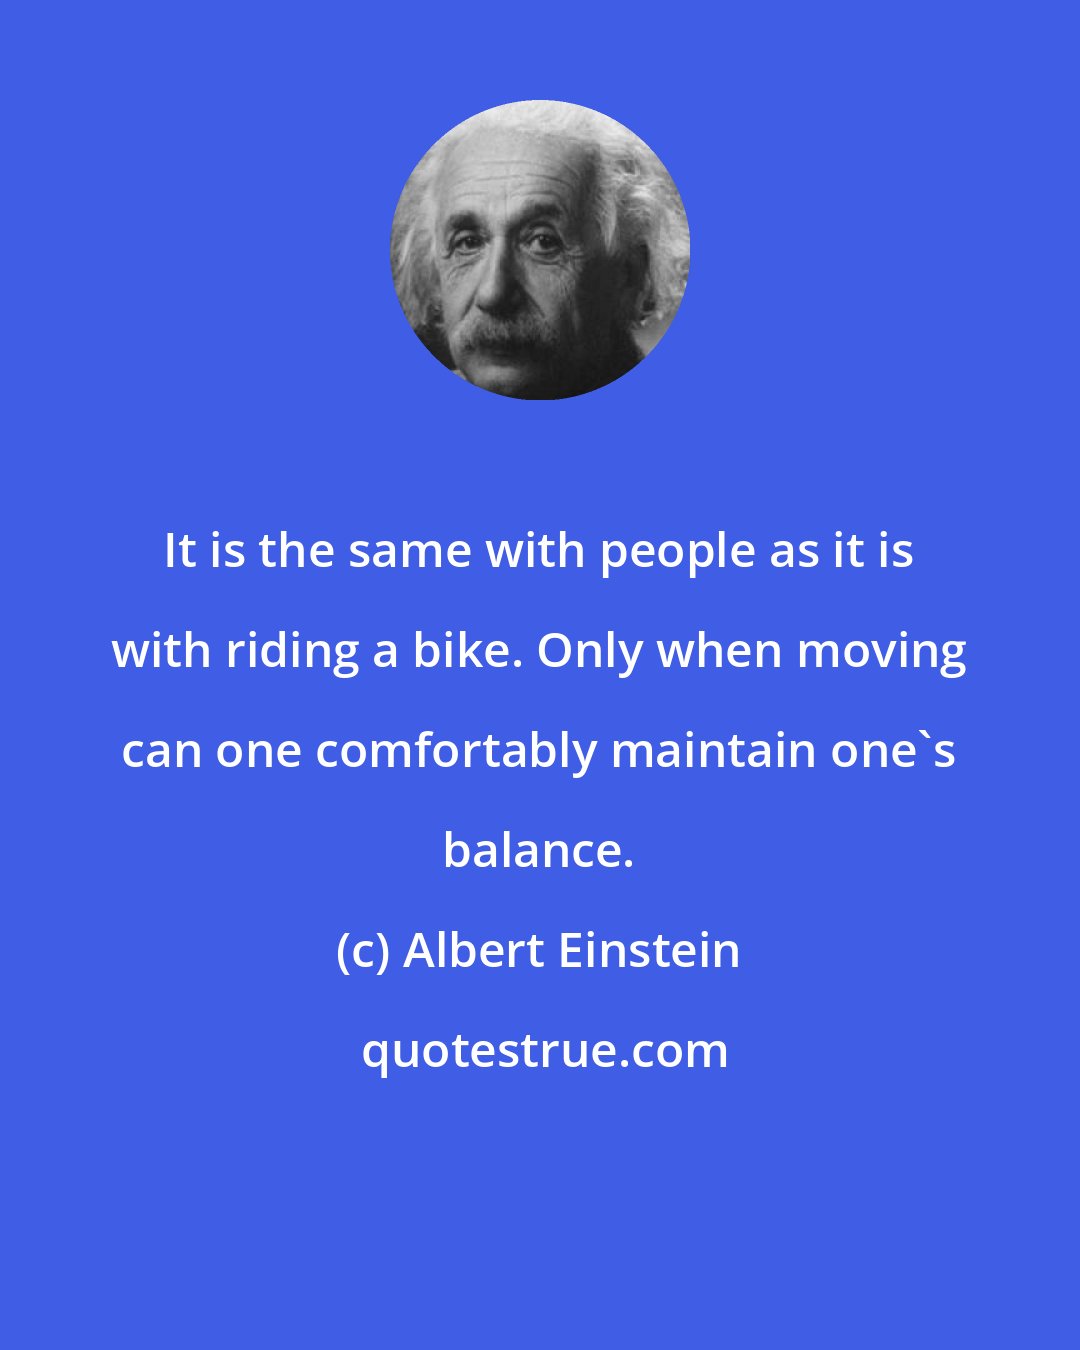 Albert Einstein: It is the same with people as it is with riding a bike. Only when moving can one comfortably maintain one's balance.